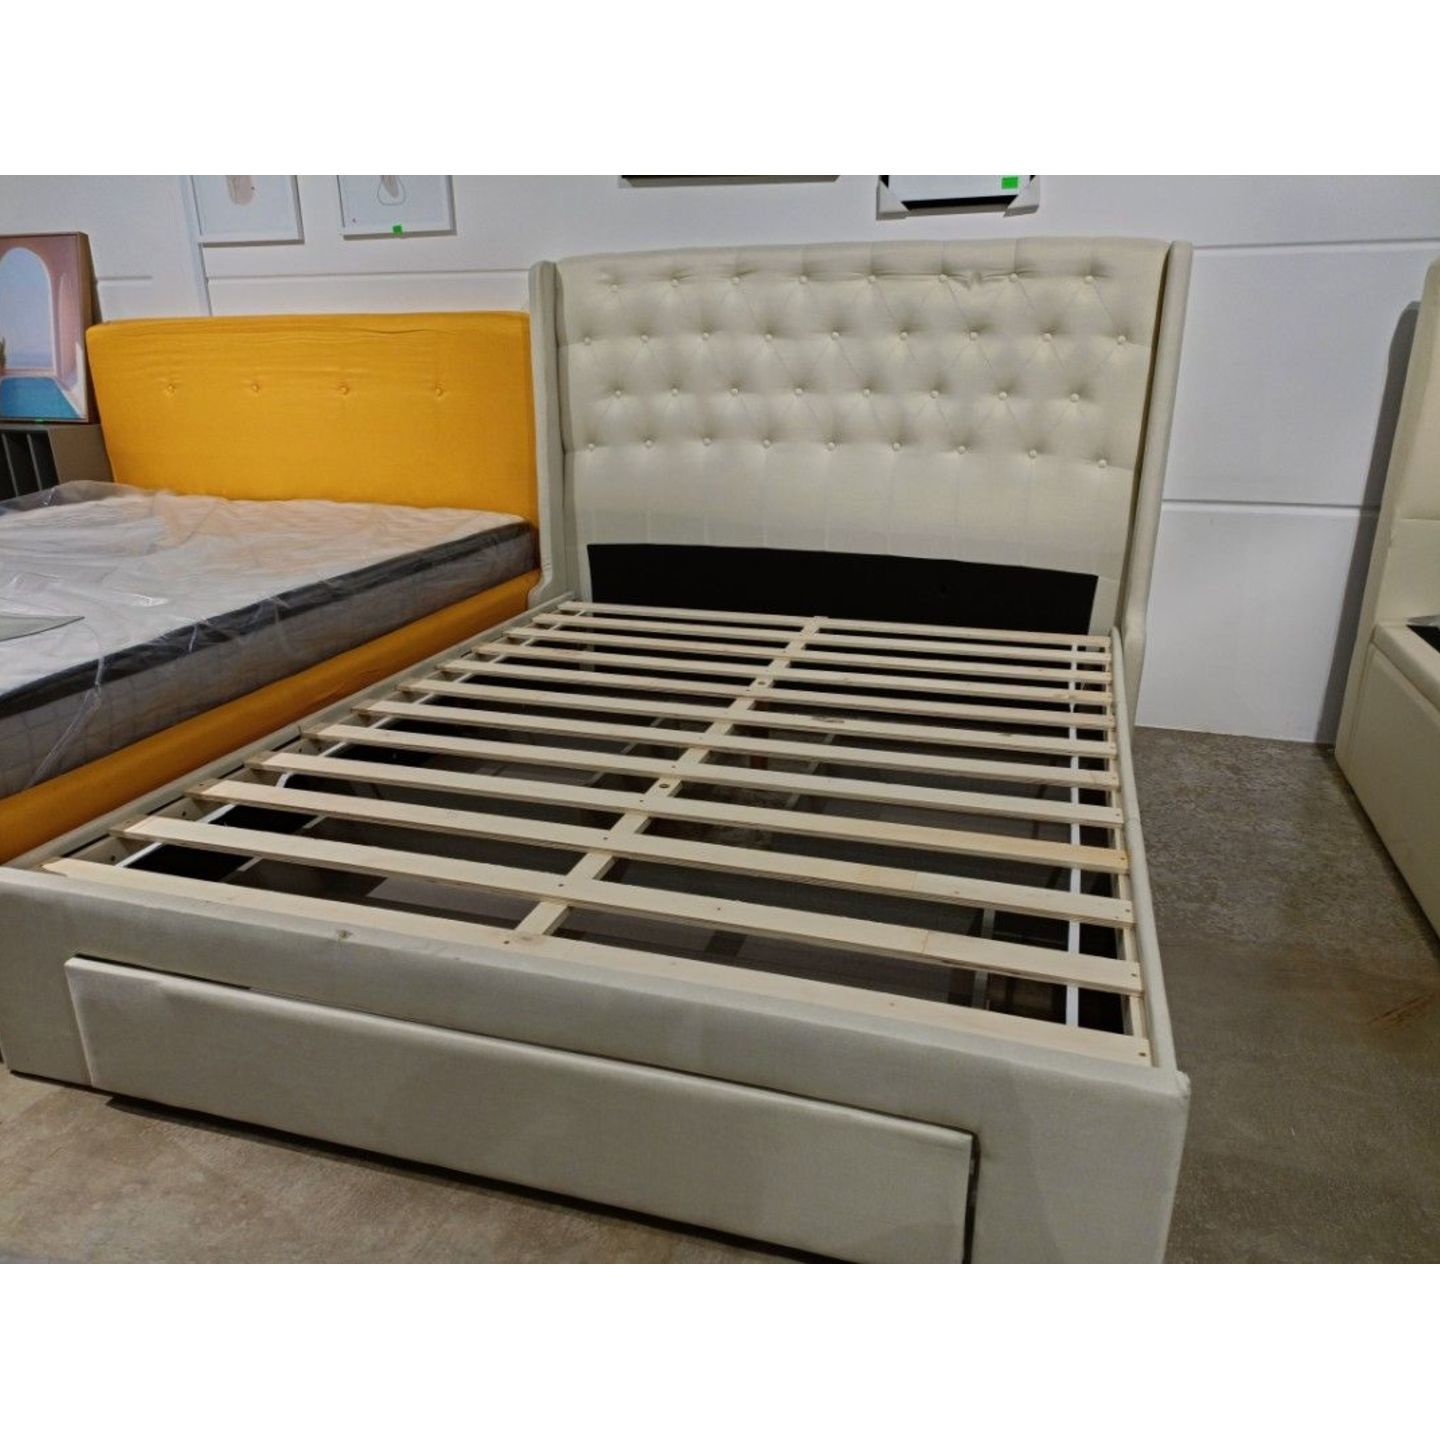 DEVER Queen Size Bedframe with Storage Drawers